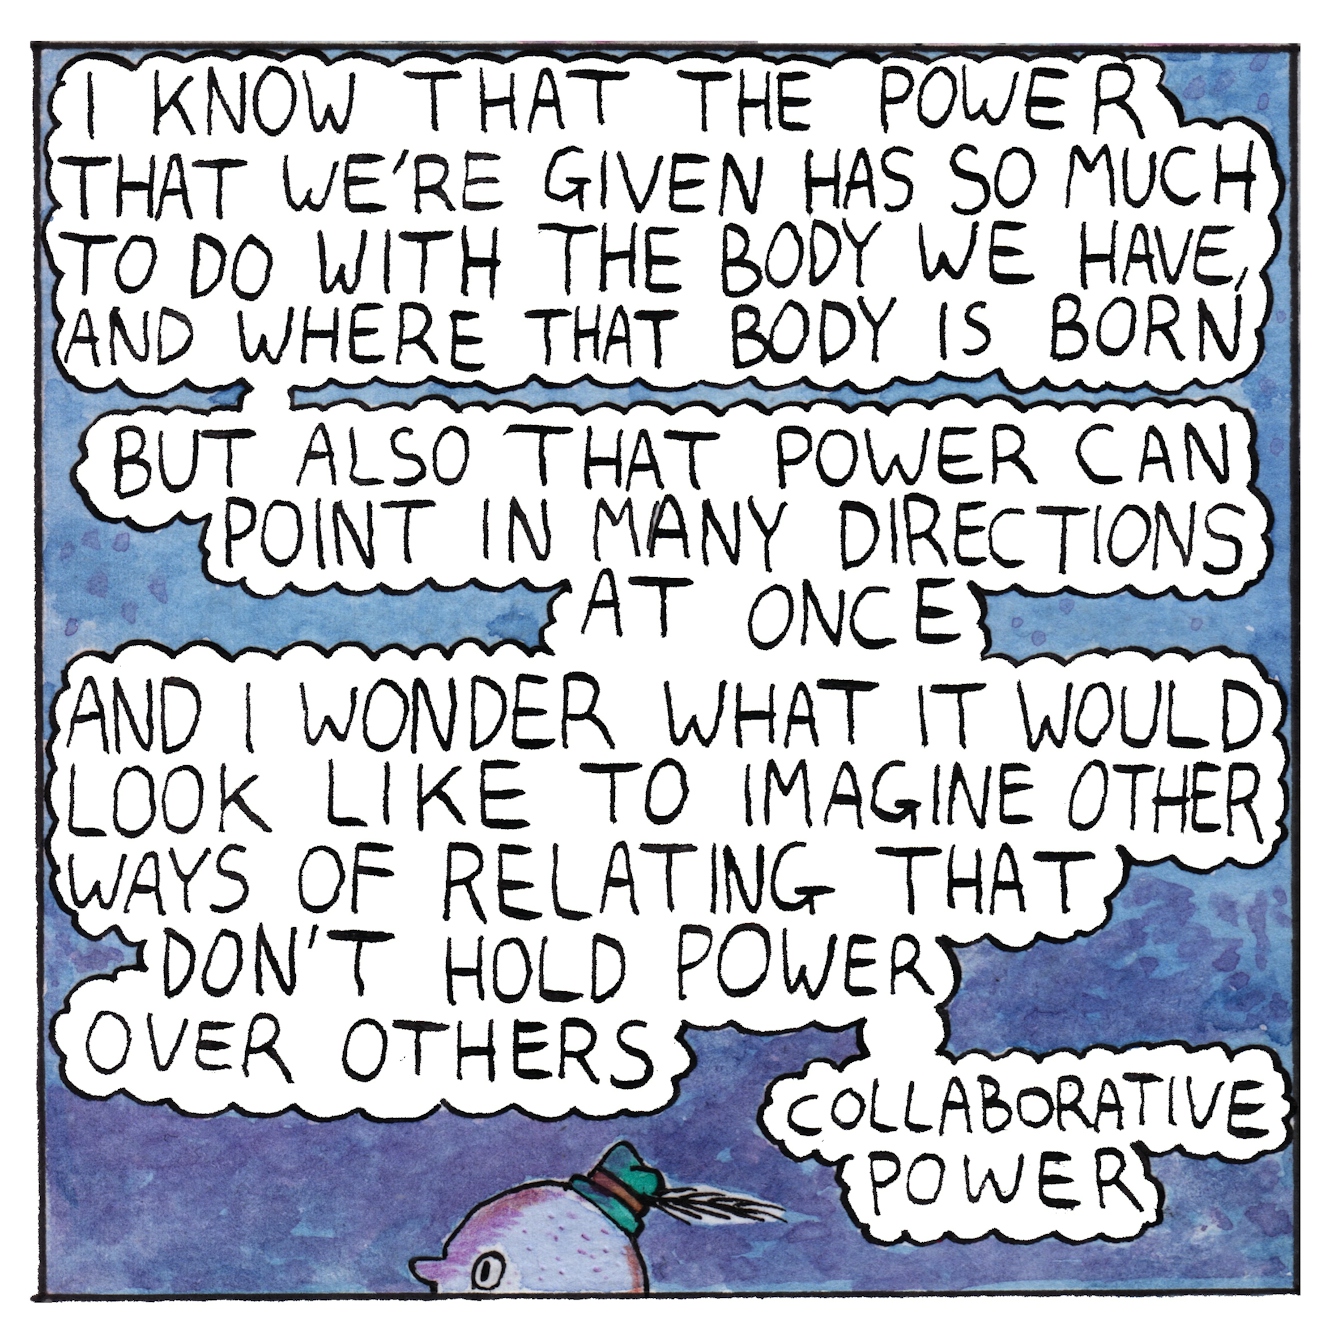 Panel 5 of the comic 'Egg Inc.': Almost the whole panel is filled with text bubbles against a mid-blue background. At the very bottom centre of the panel, the top of a small oval head wearing a green had peers out. The text says "I know that the power that we're given has so much to do with the body we have and where that body is born. But also that power can point in many directions at once and I wonder what it would look like to imaging other ways of relating that don't hold power over others. Collaborative power."